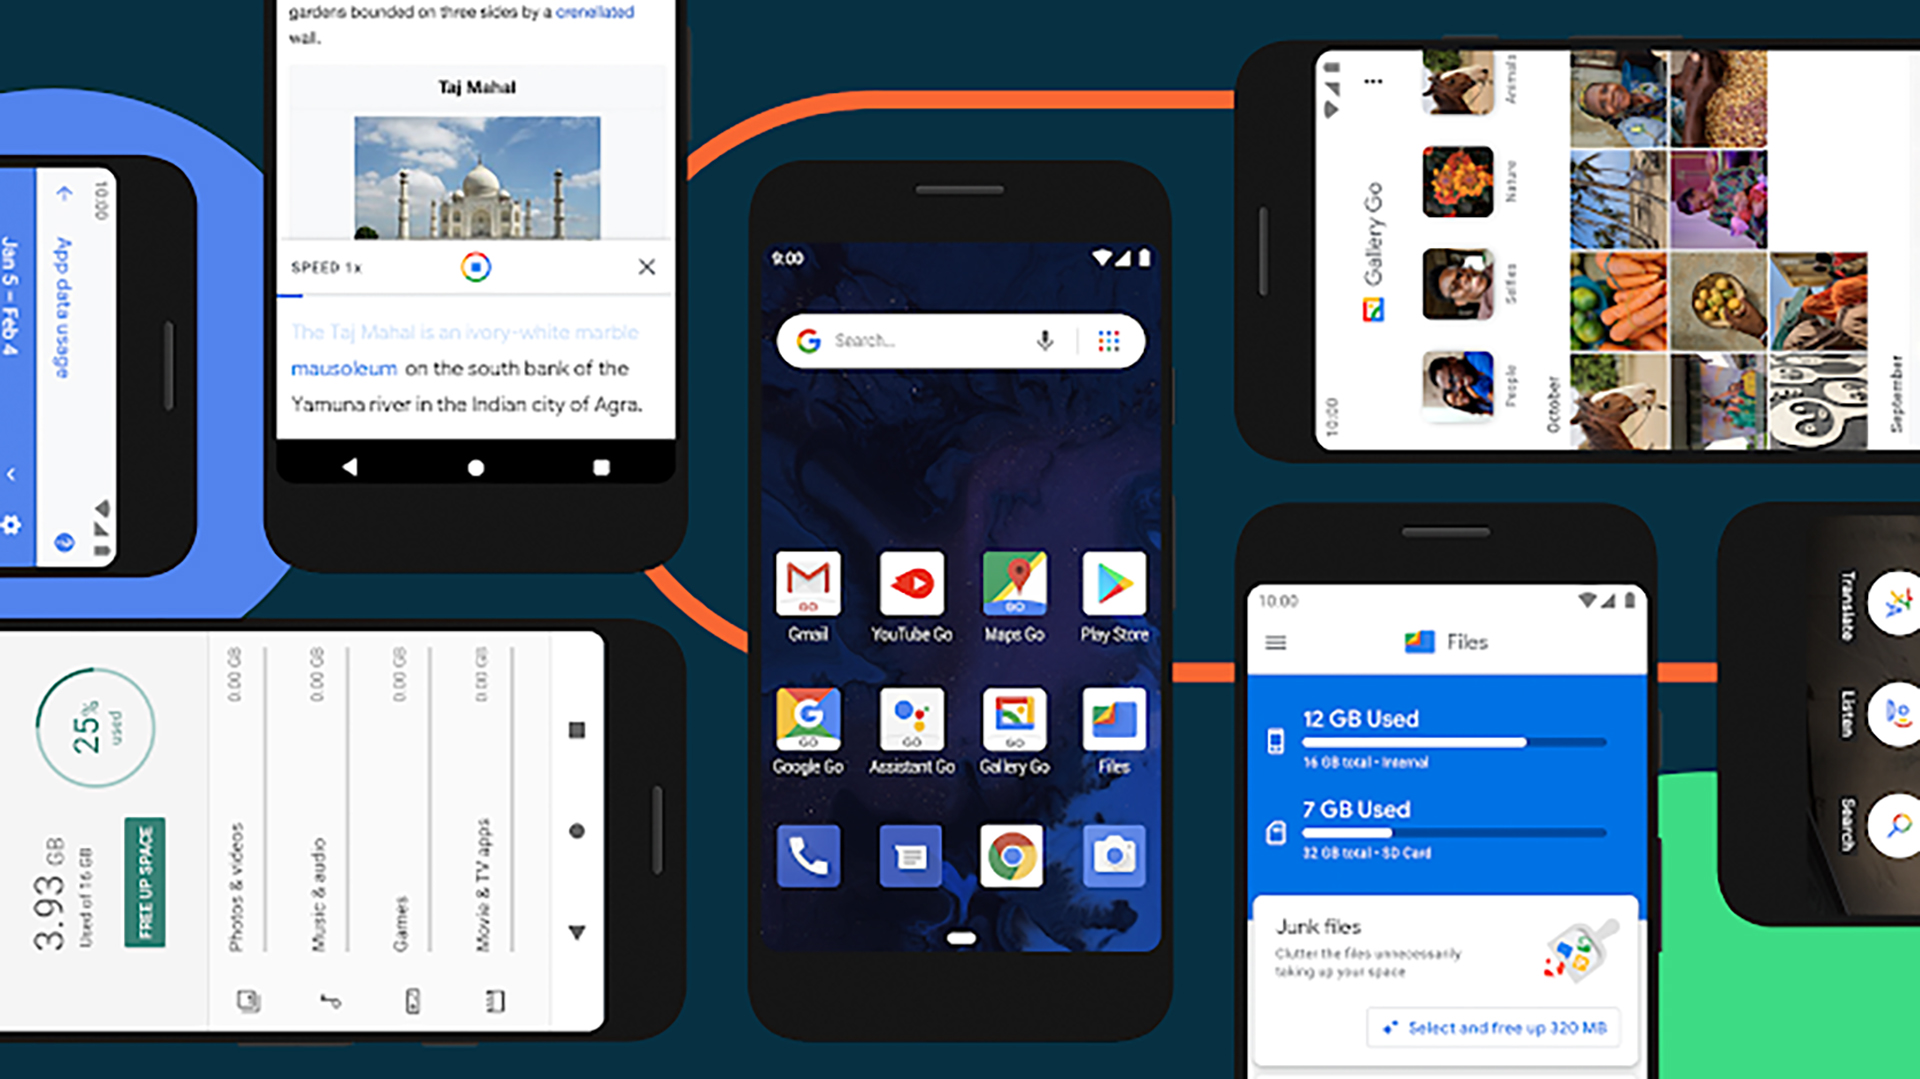 Android Go based on Android 10 collage of smartphones running the operating system